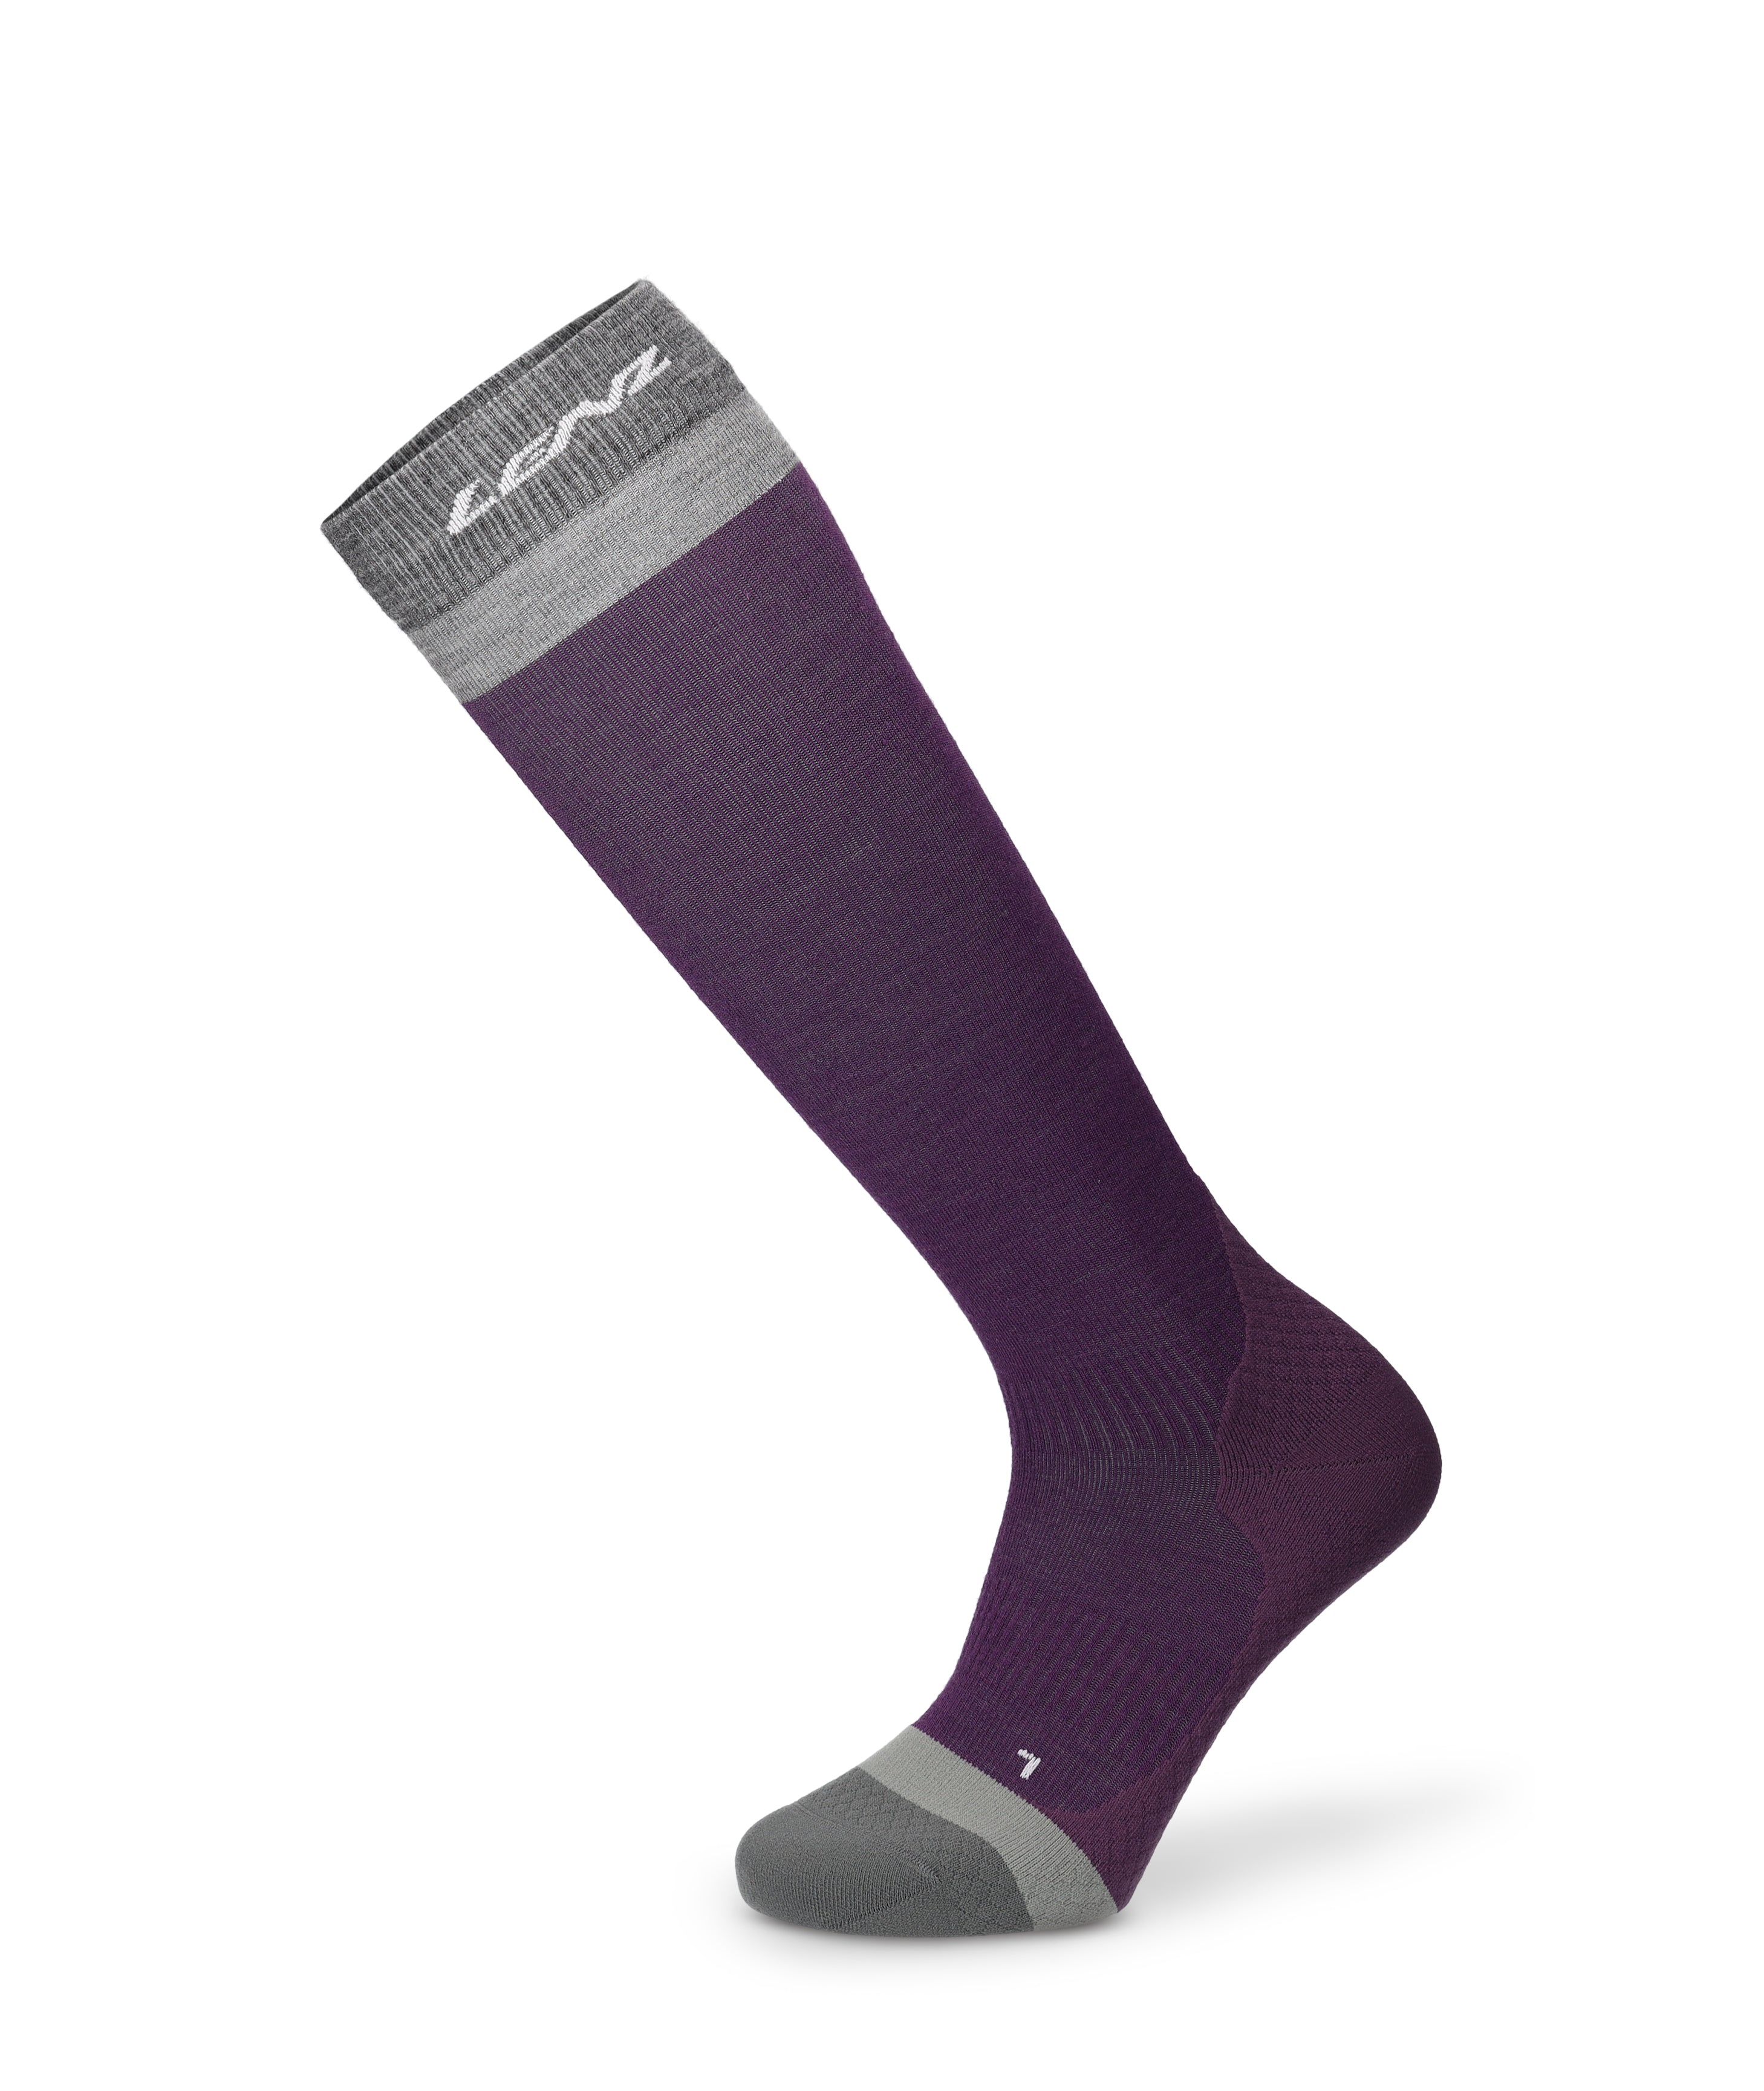 Lenz THINK ABOUT Merino Compressions Socks 1 aubergine